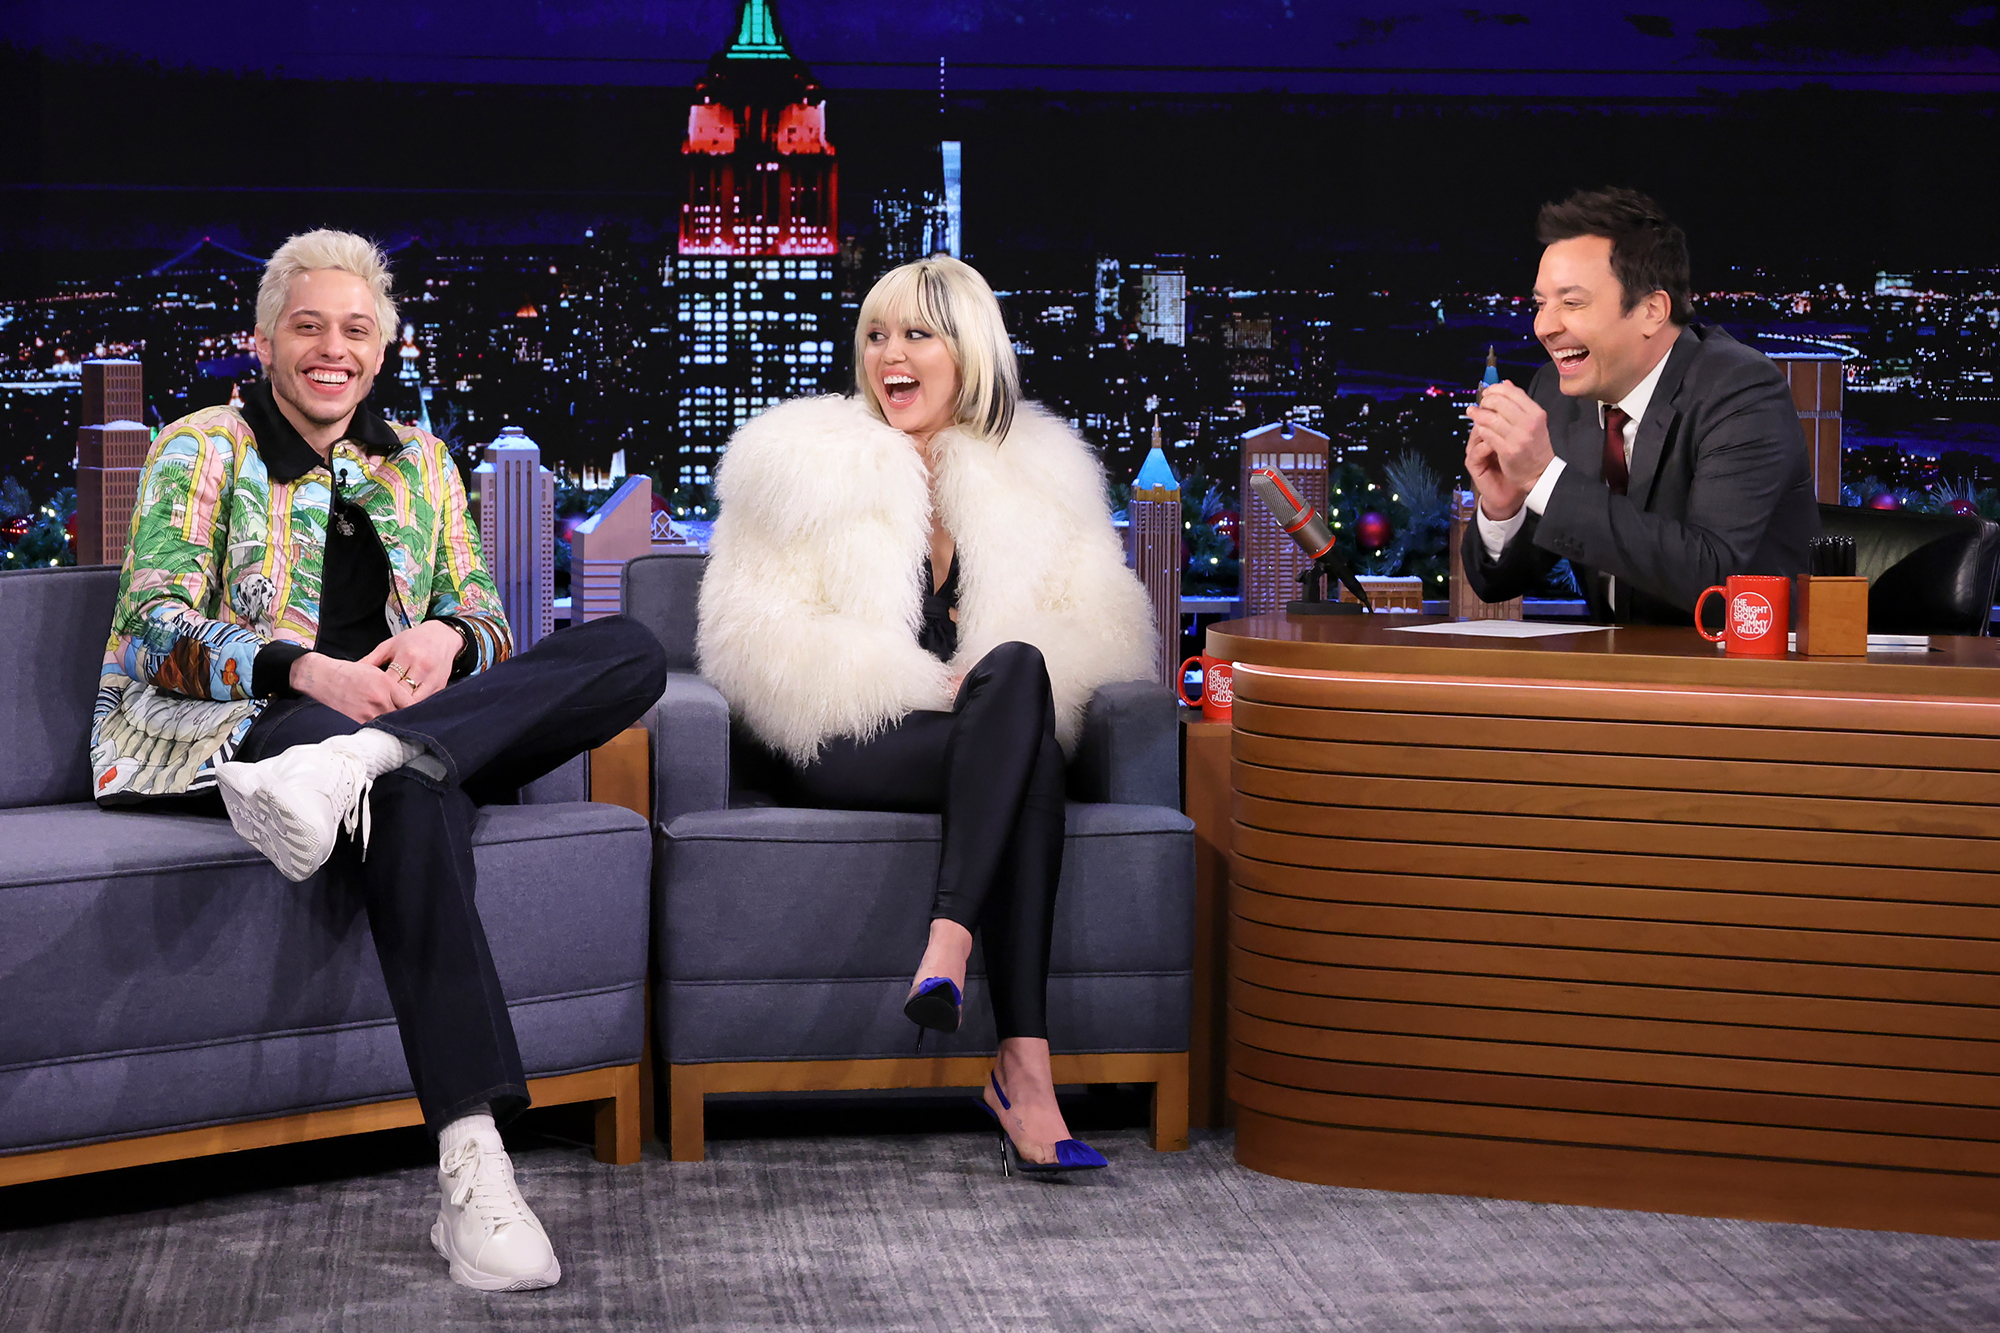 Miley Cyrus and Pete Davidson get ready to host New Year’s Eve special: